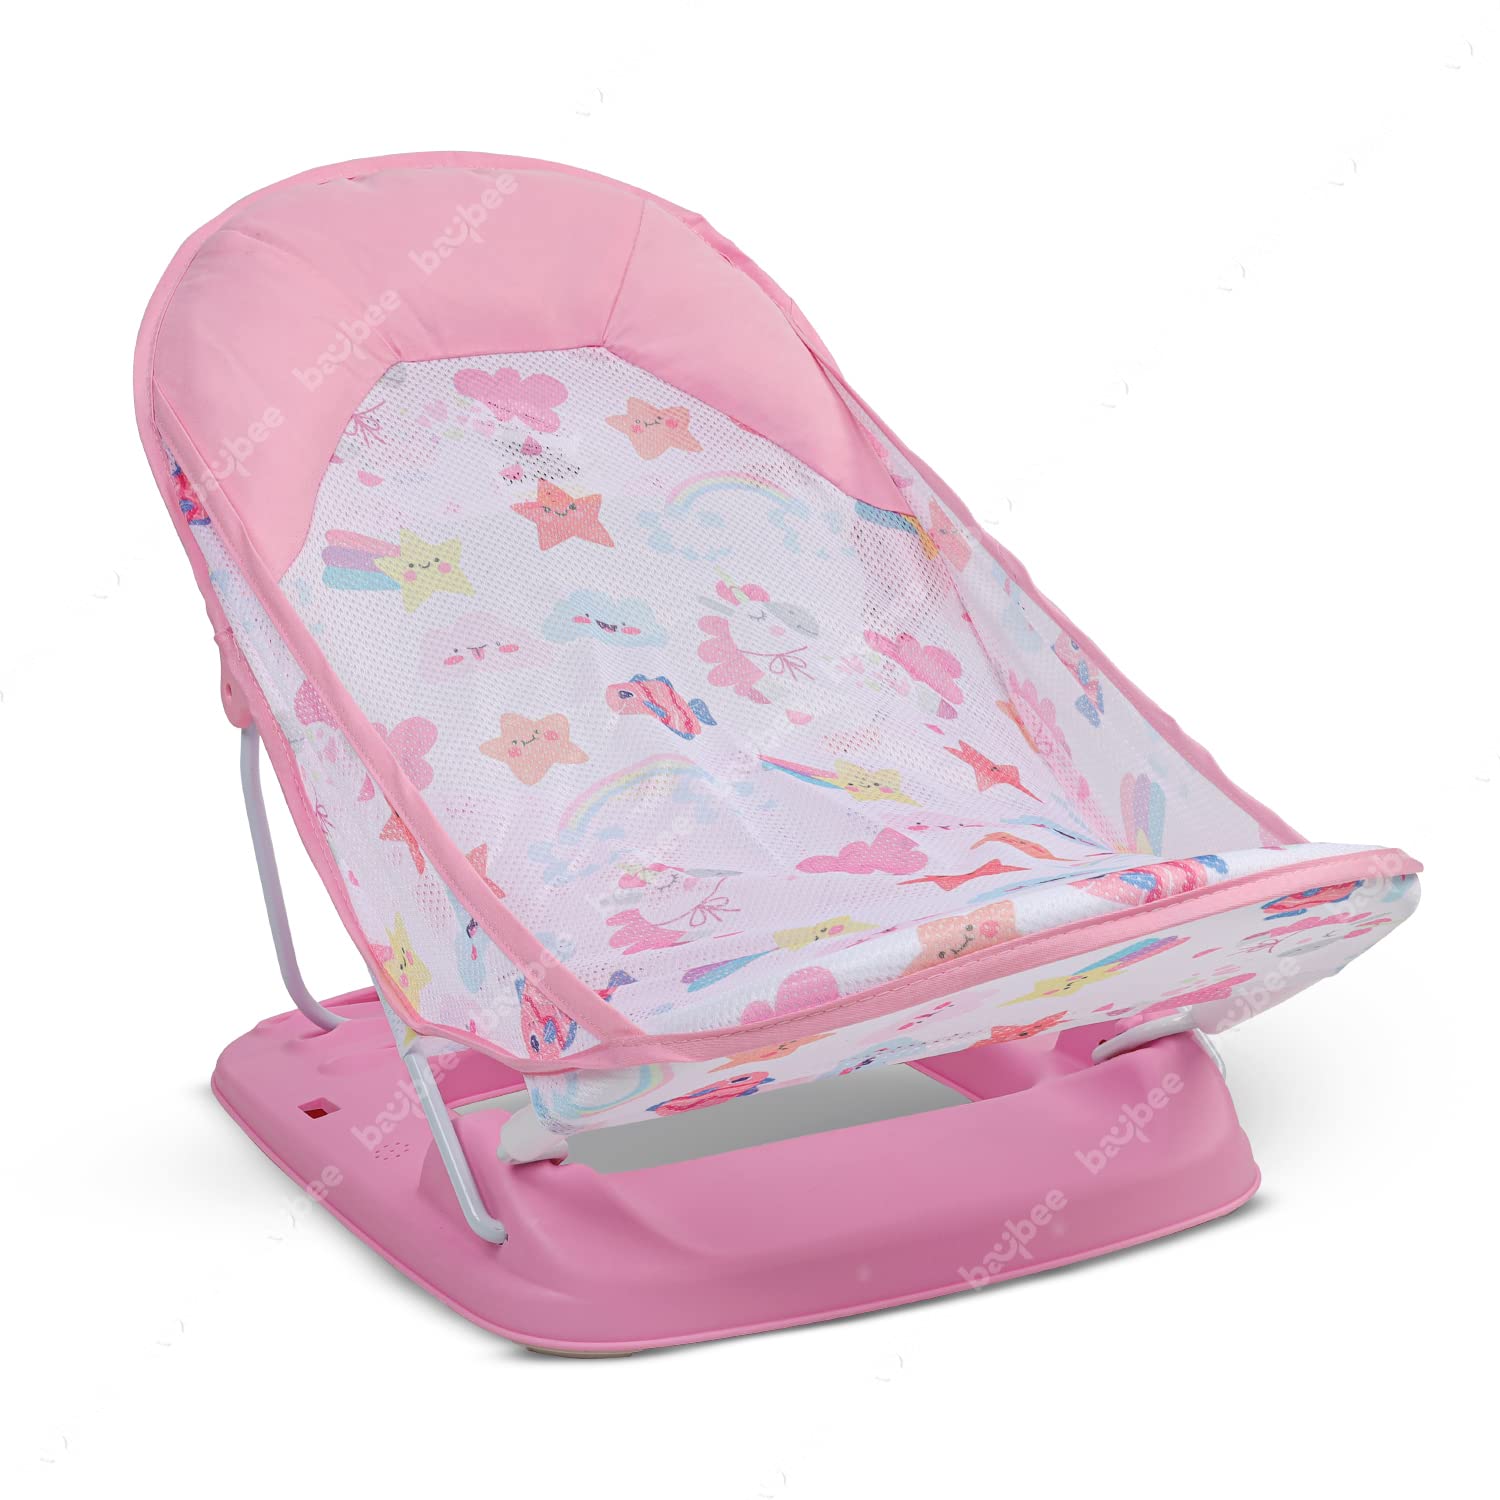 Infant Baby Bather - 3 Position Reclinable & Foldable - ( Pink)